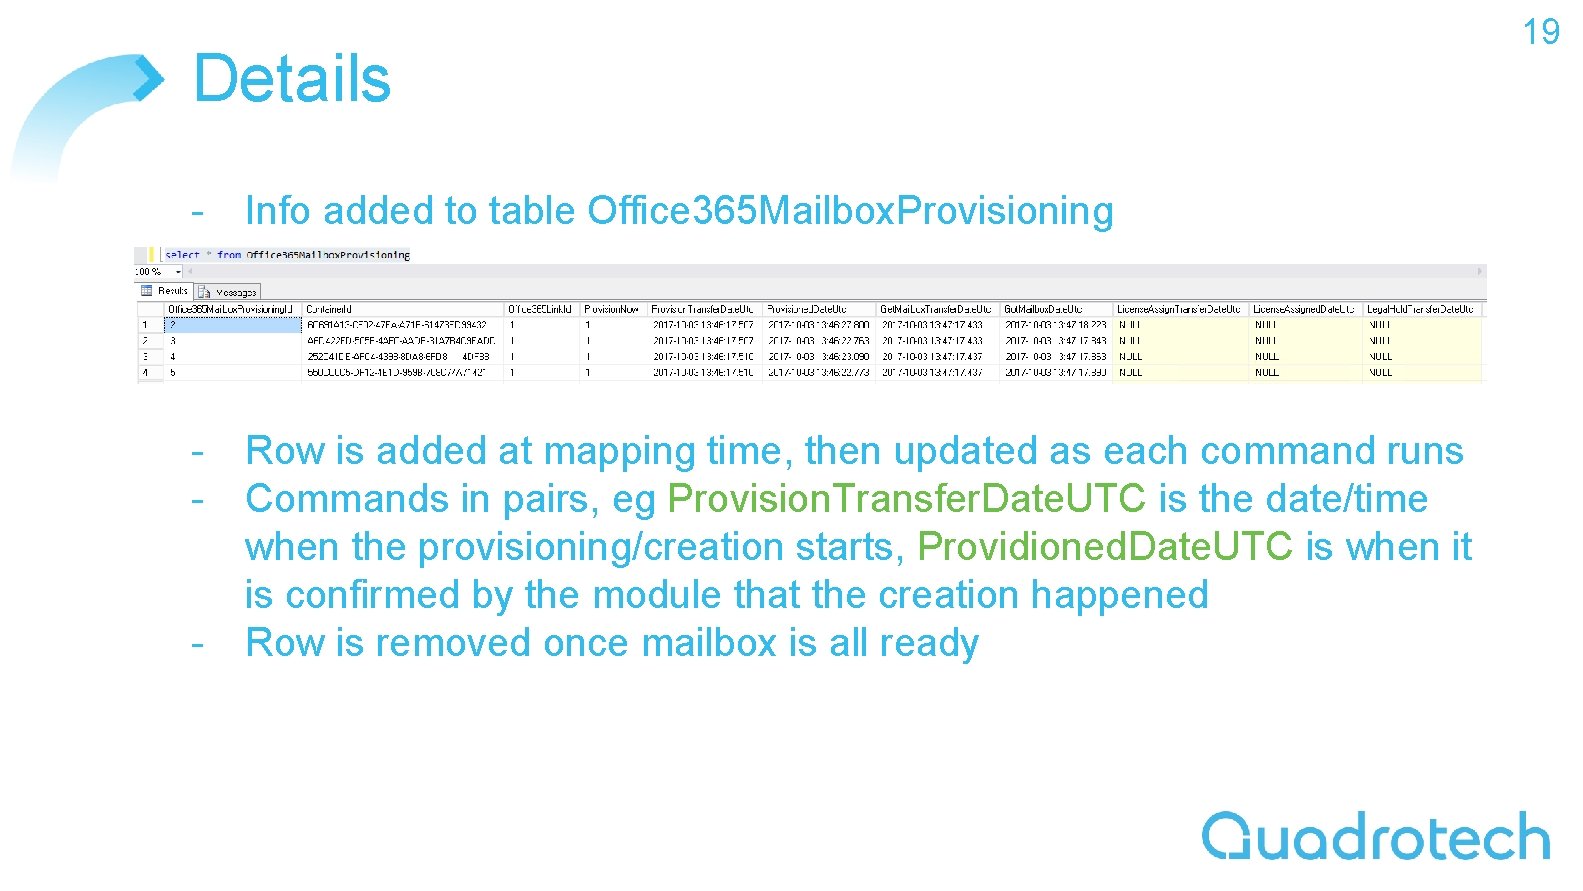 Details - Info added to table Office 365 Mailbox. Provisioning - Row is added